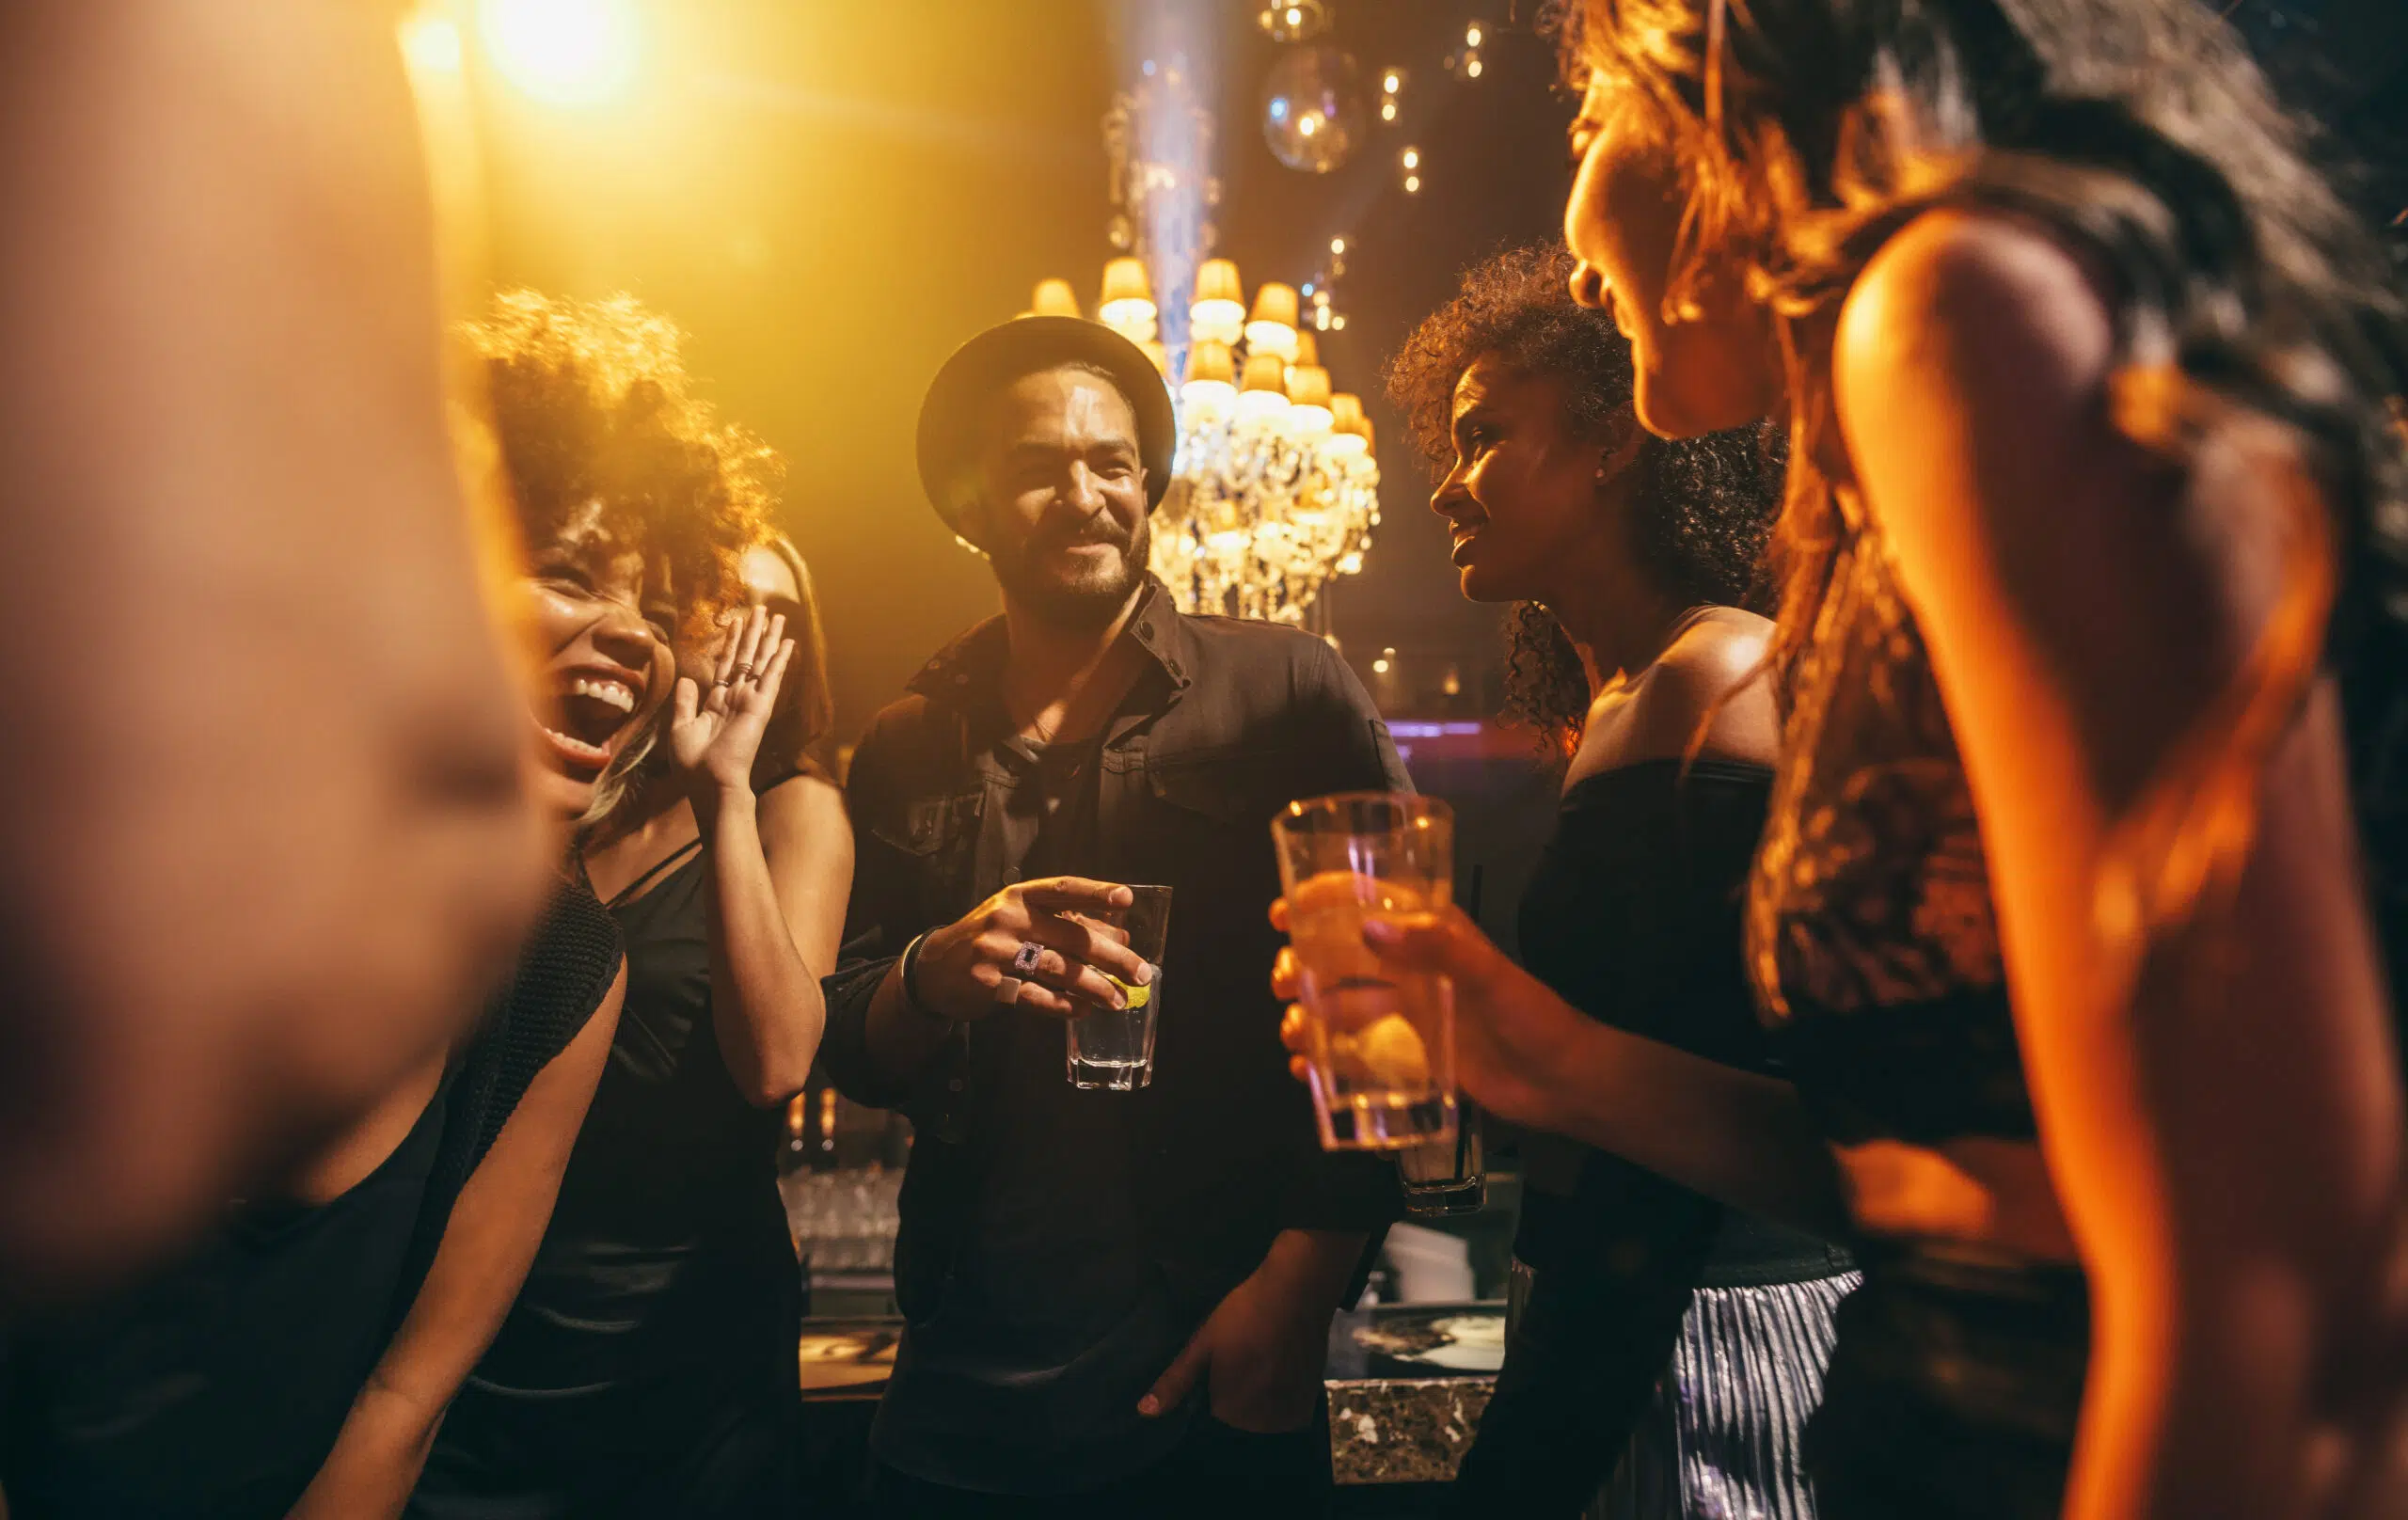 Is My Social Drinking Problematic?